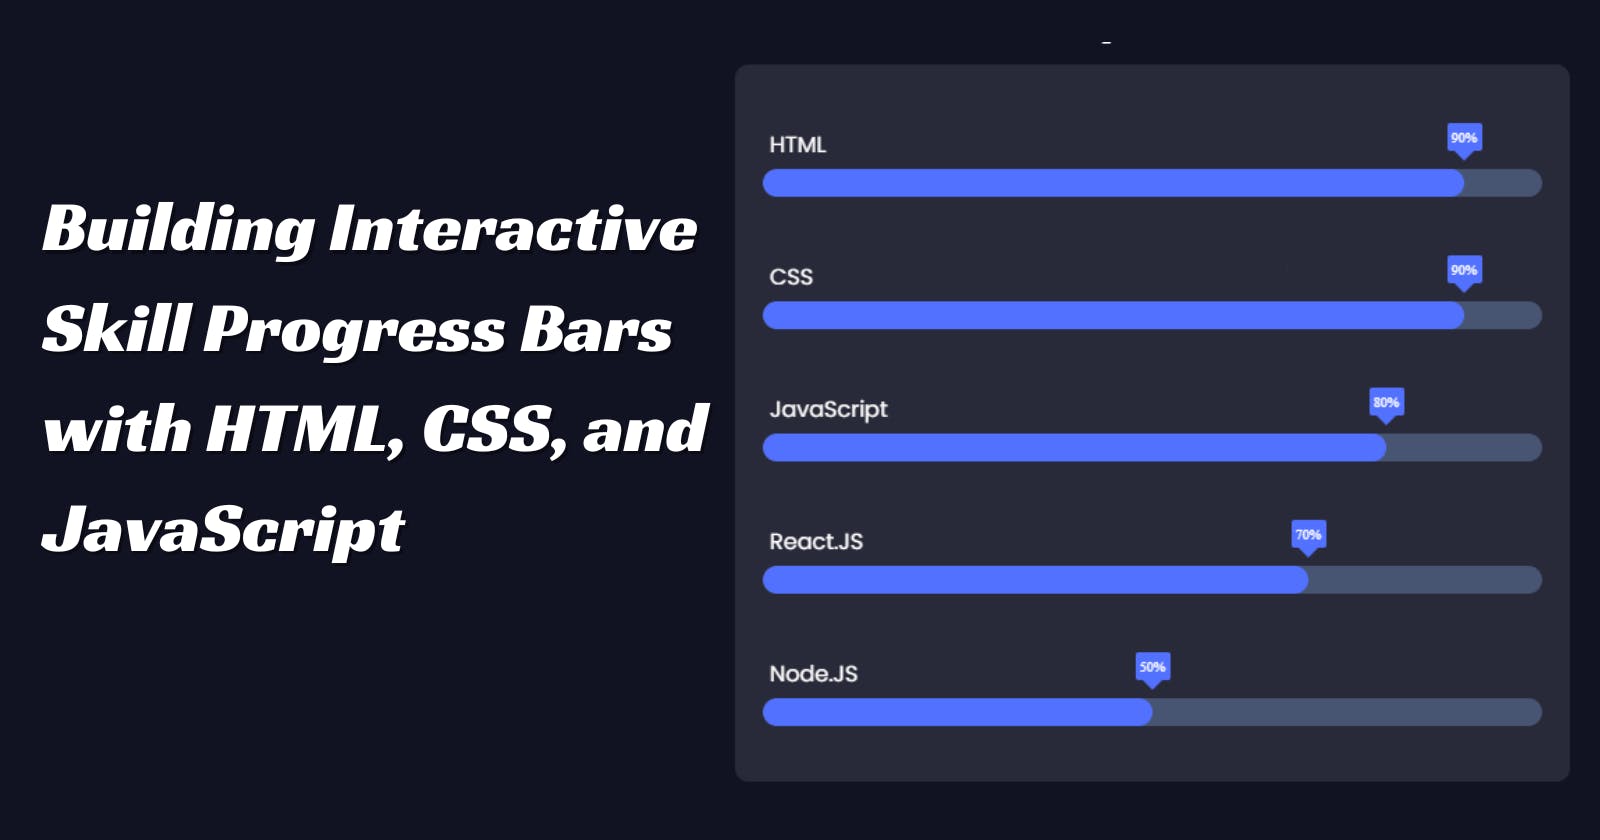 Building Interactive Skill Progress Bars with HTML, CSS, and JavaScript